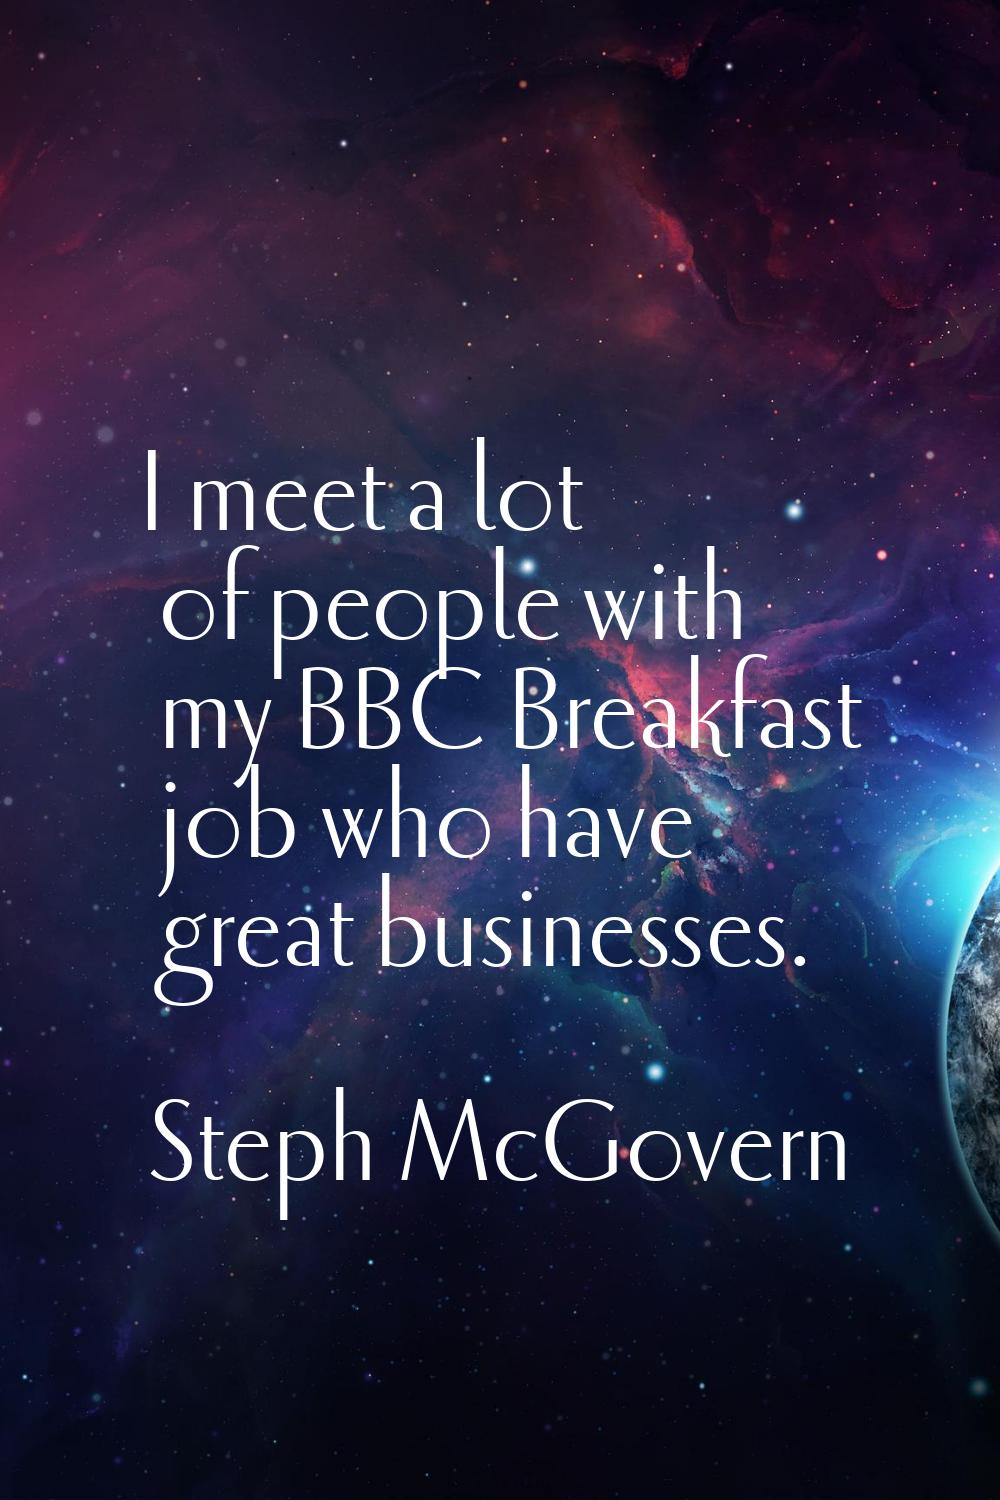 I meet a lot of people with my BBC Breakfast job who have great businesses.